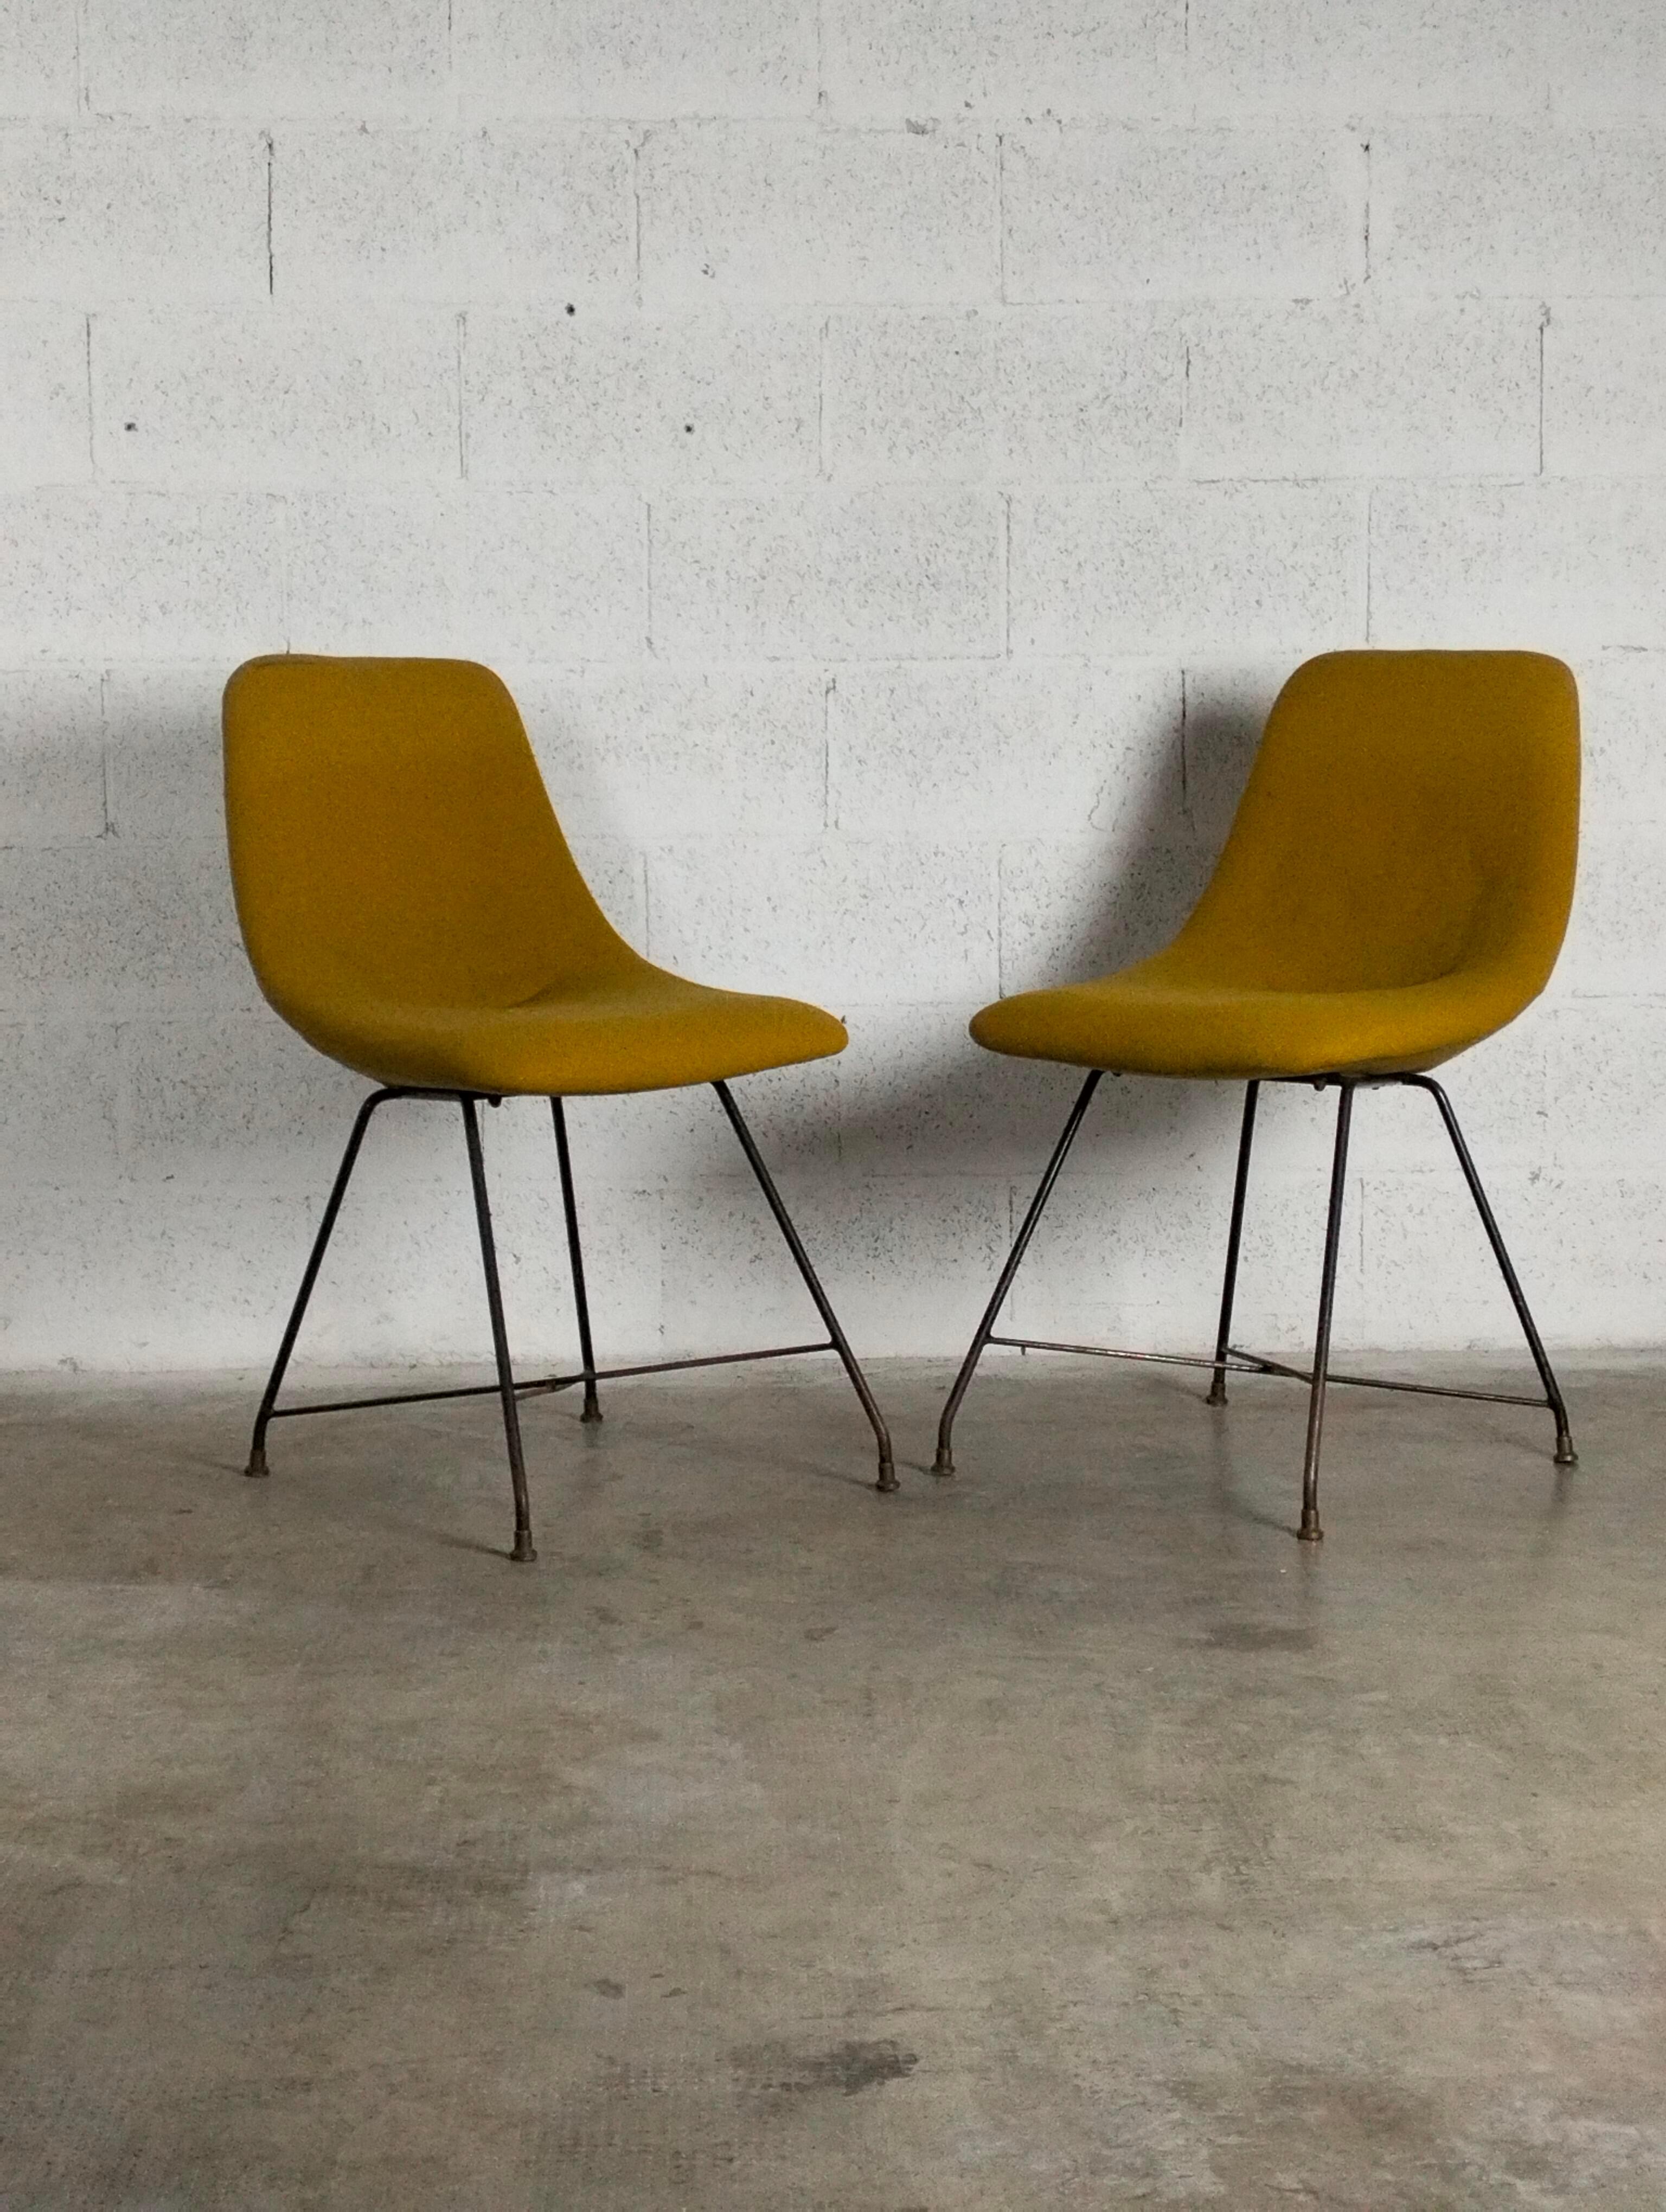 Set of 2 aster chairs by Augusto Bozzi for Saporiti - ‘50'60

Augusto Bozzi
(1924 - 1982)
The name of the designer Augusto Bozzi is linked to that of Sergio Saporiti, founder in 1945 of the homonymous company. Thanks to their fruitful